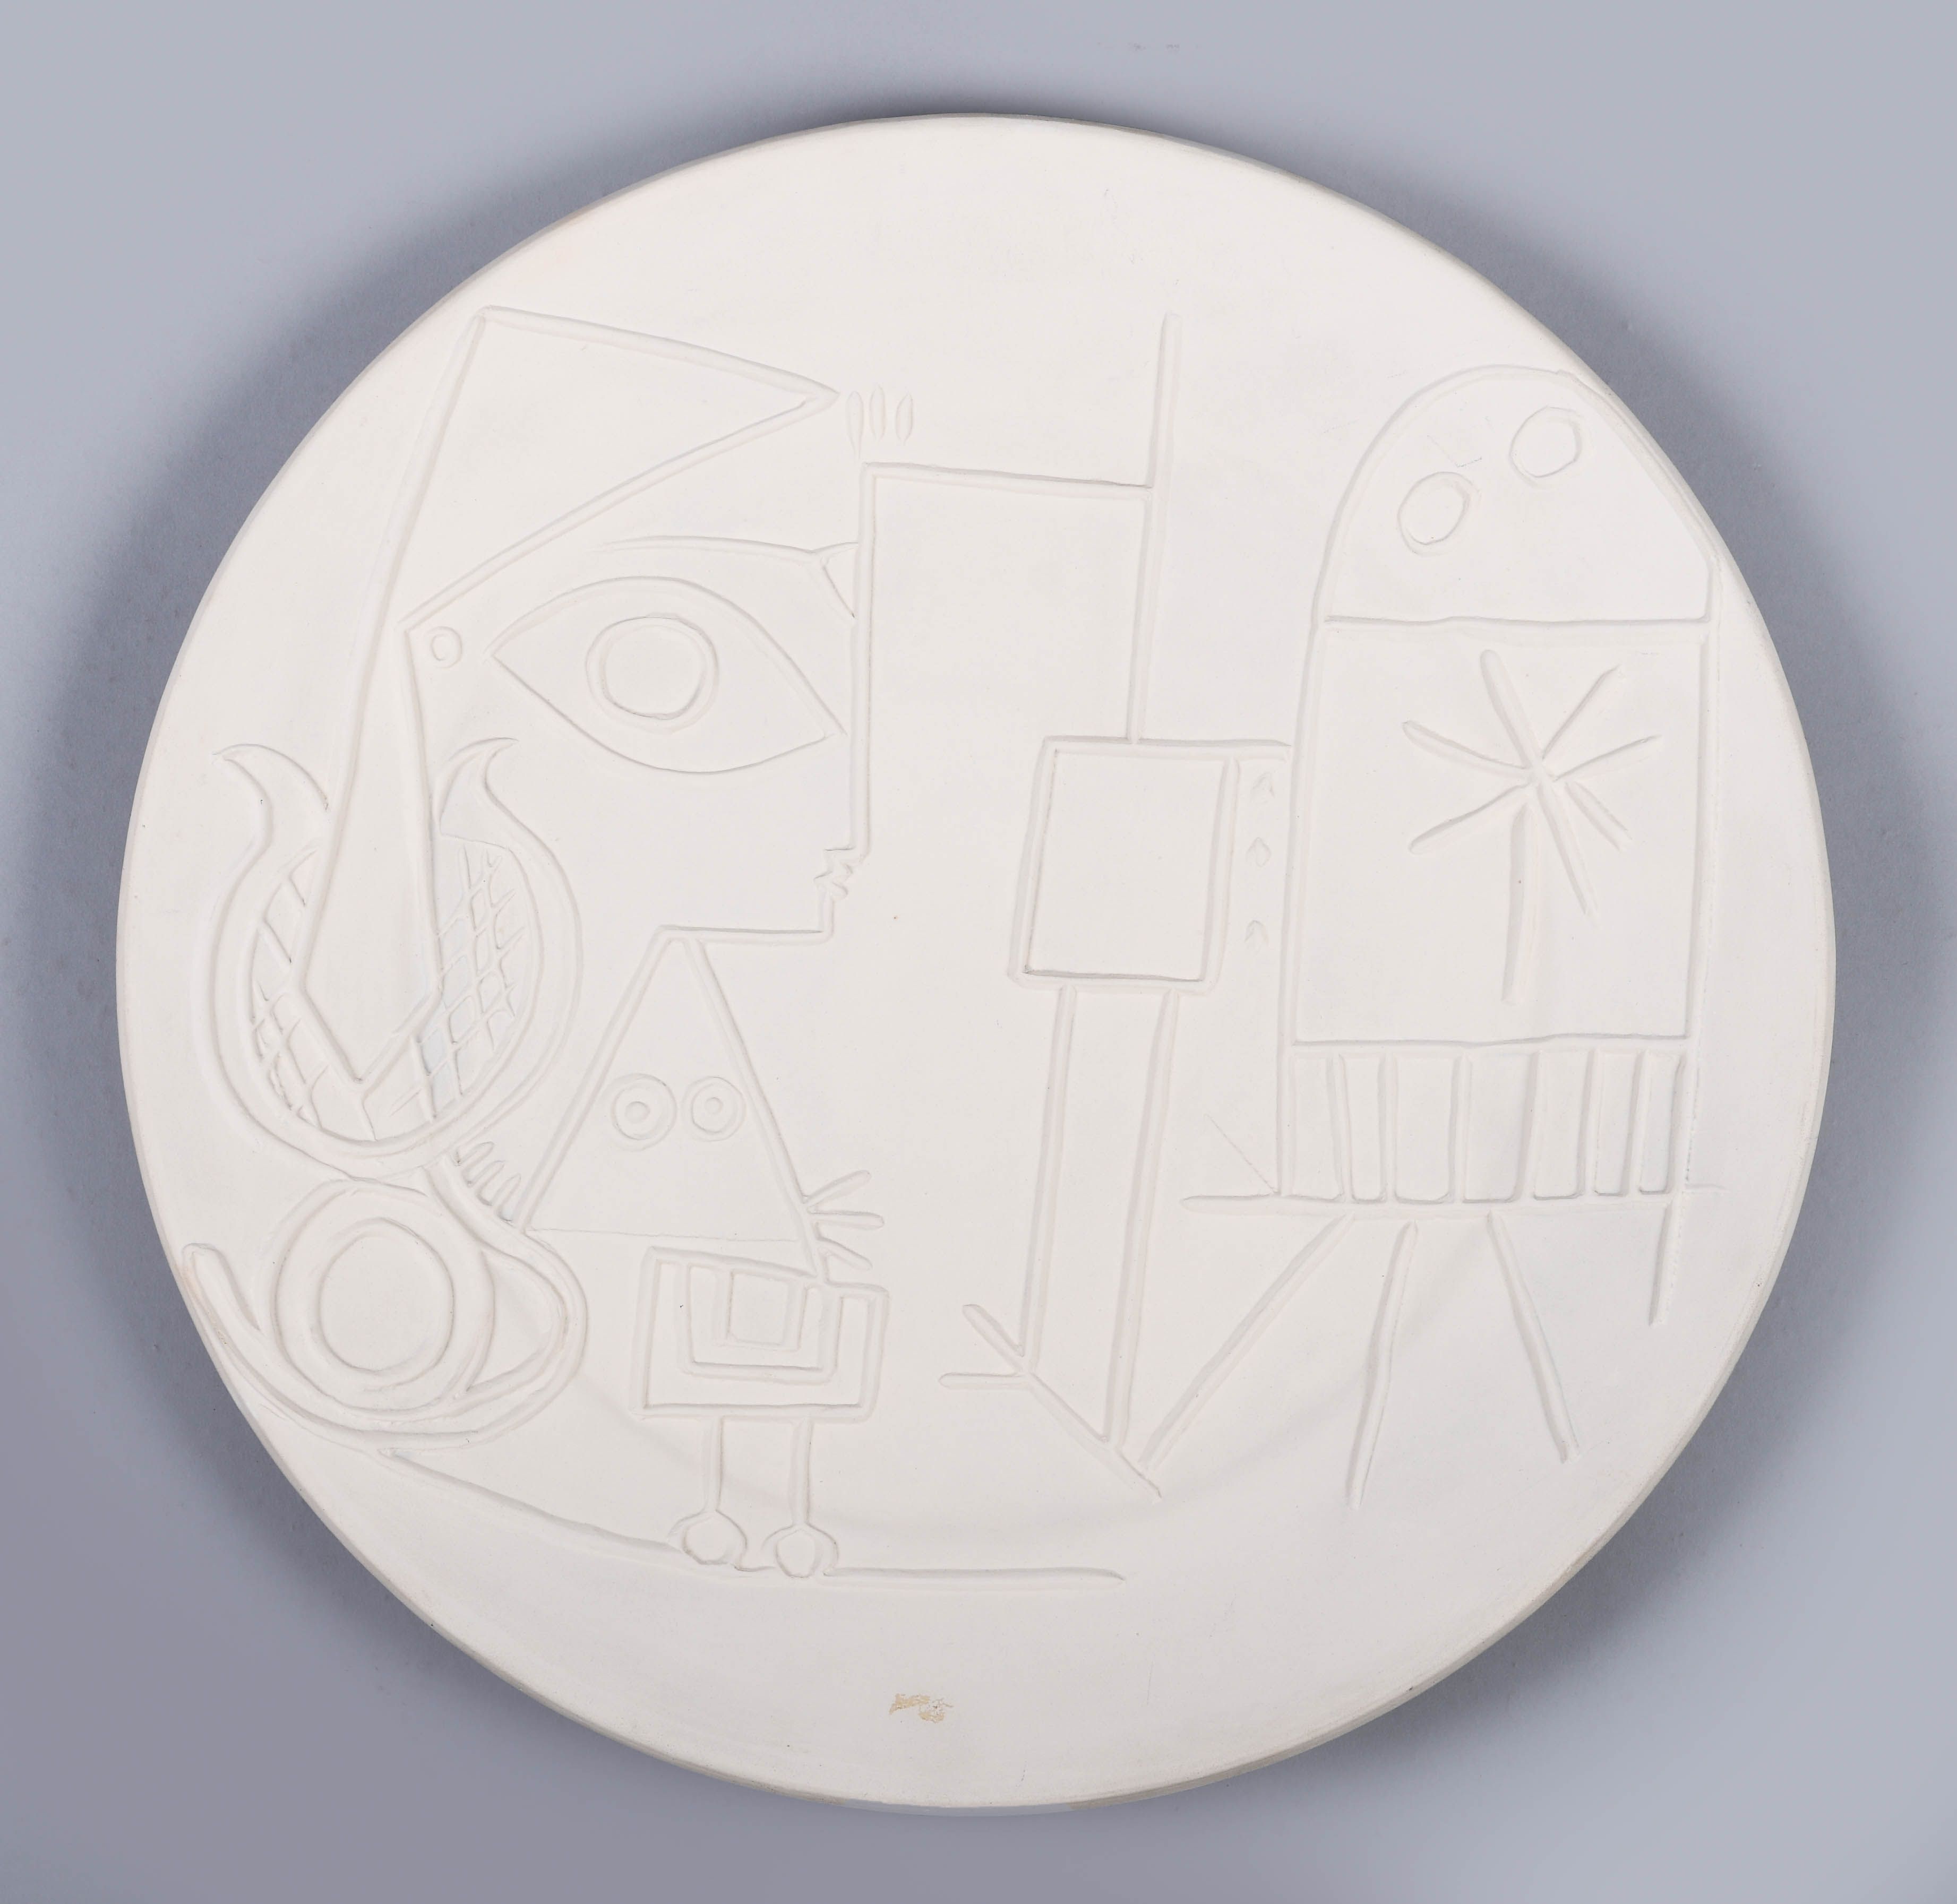 A Picasso plate